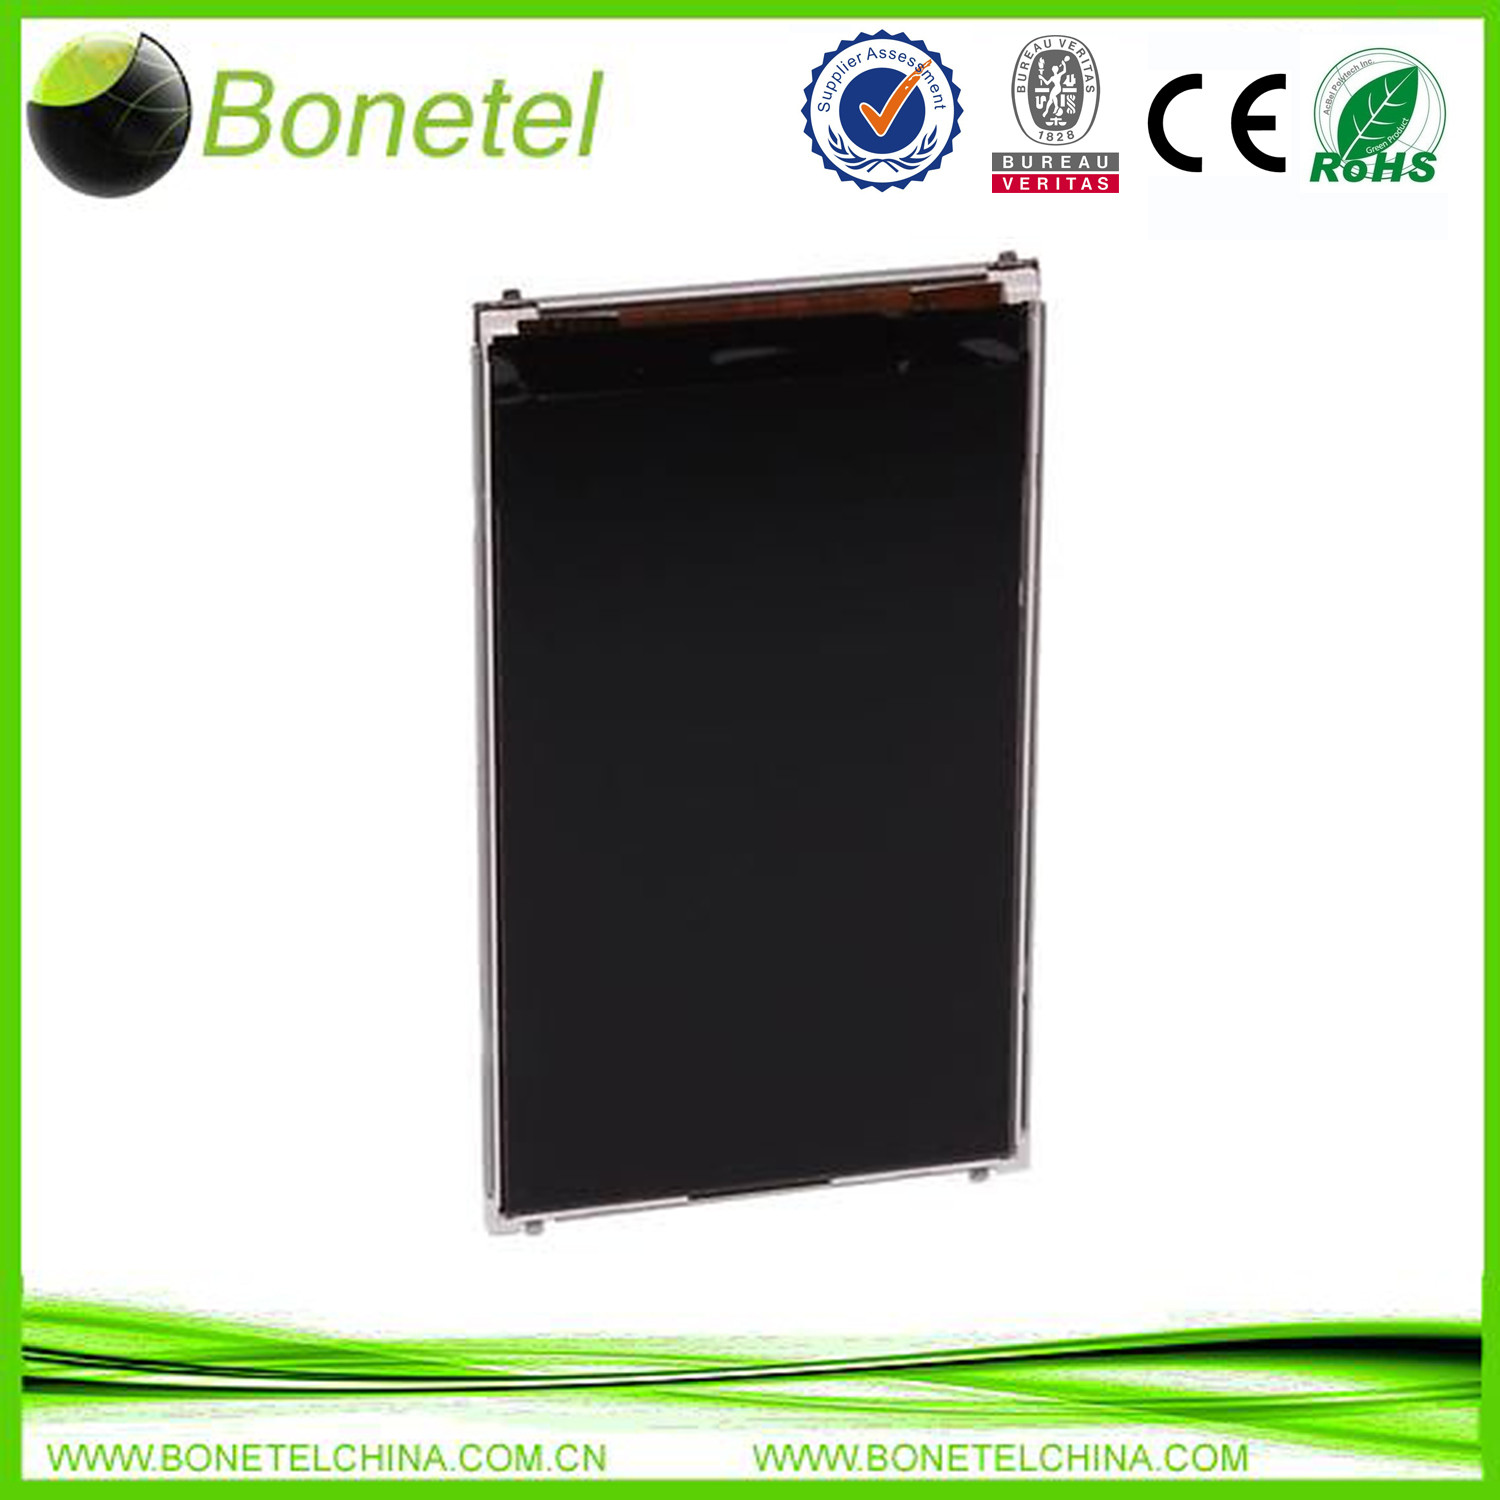 Newest LCD Screen Display Replacement for Samsung S5230 S5233